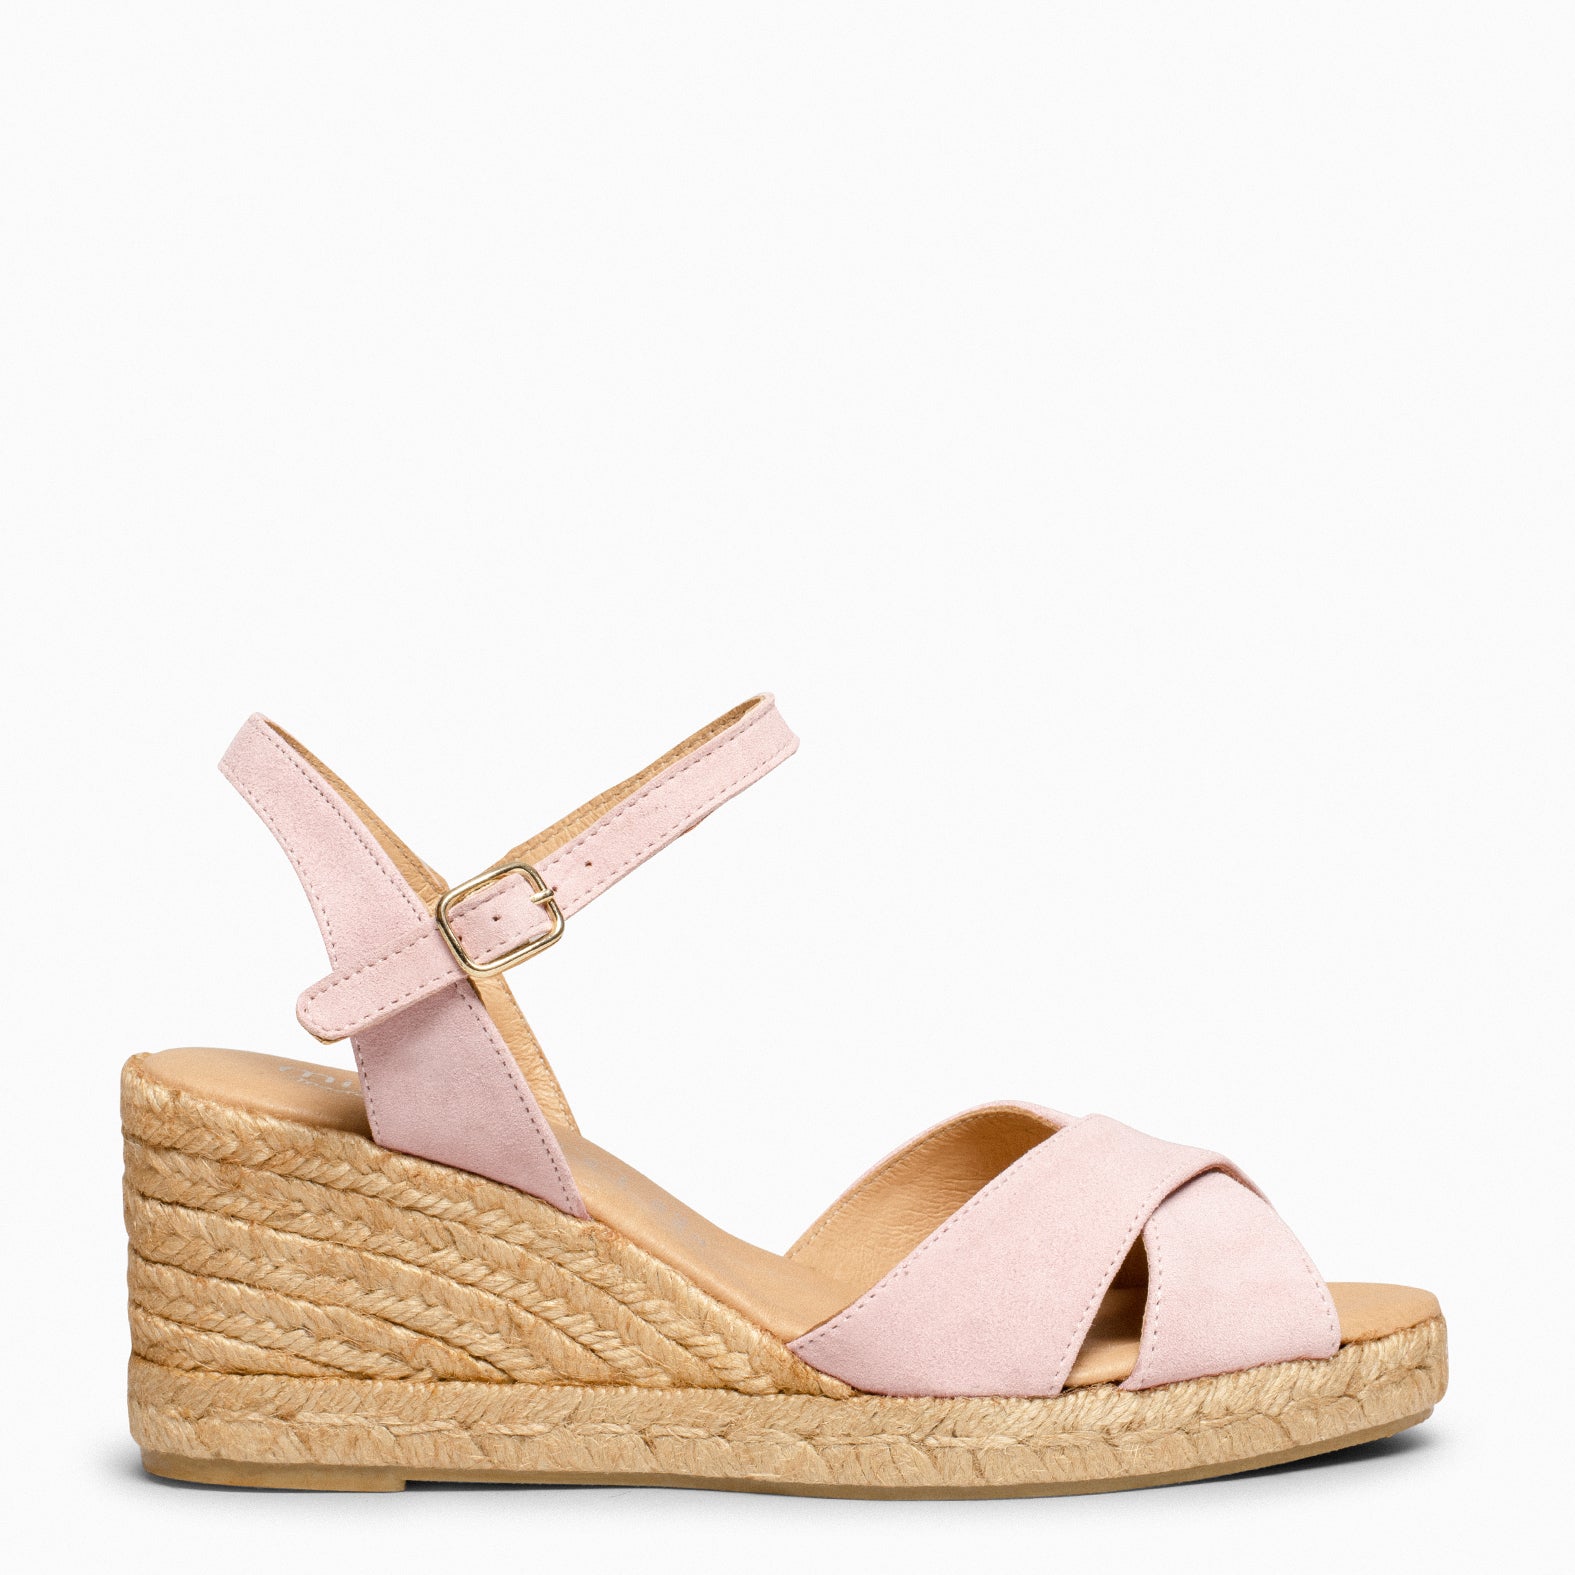 CALPE – PALE PINK suede leather espadrille